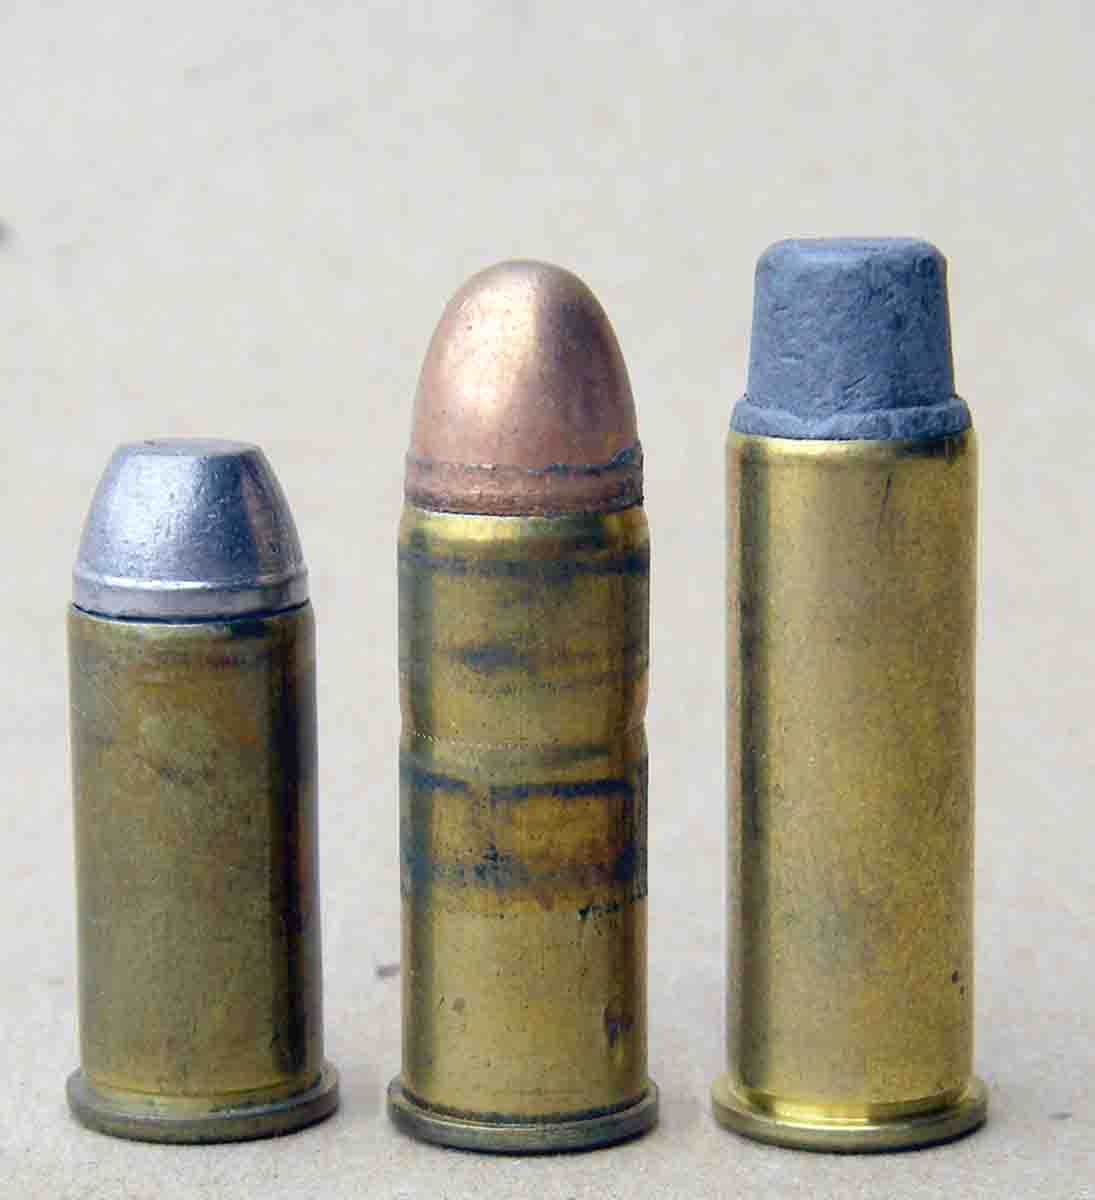 The .44 Special (center) was based on a lengthened .44 Russian cartridge (left), while the .44 Remington Magnum (right) is based on a lengthened .44 Special case.